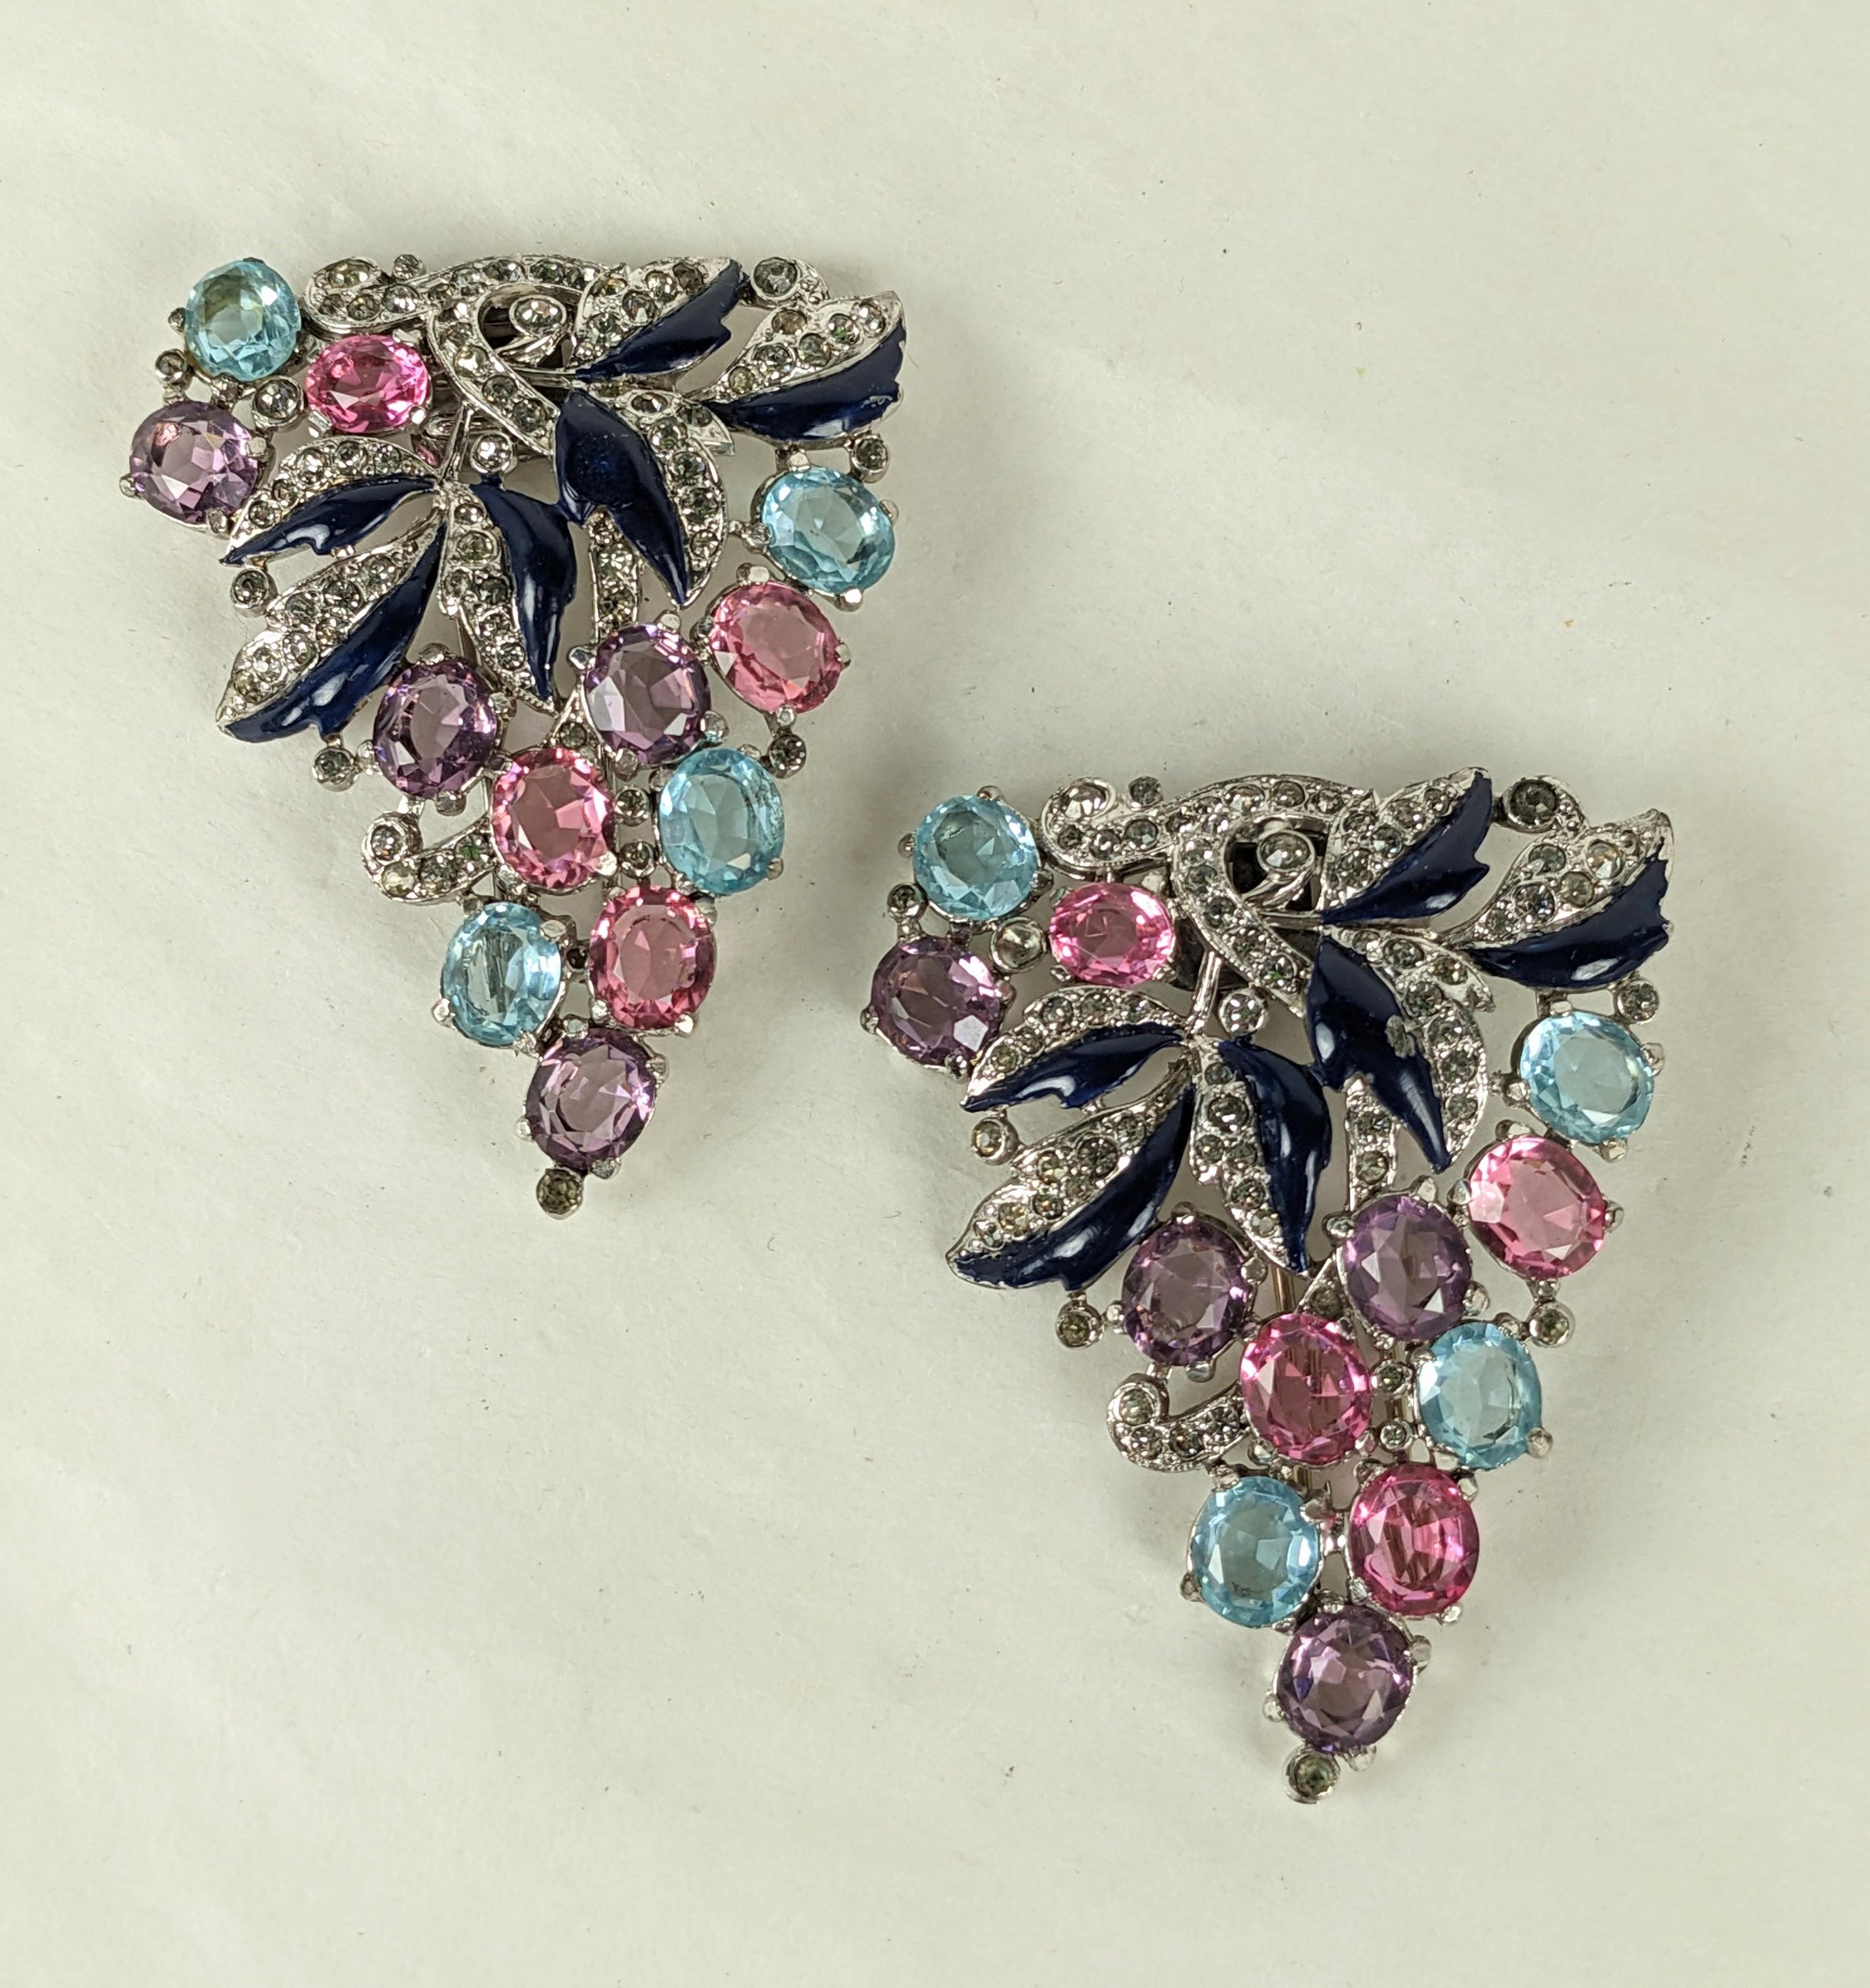 Trifari Enamel Jeweled Clips by Alfred Phillipe. Pink, amythest and aqua oval pastes with navy hand enamel and pave leaf work. Beautiful quality. 1930's USA. Each clip 2